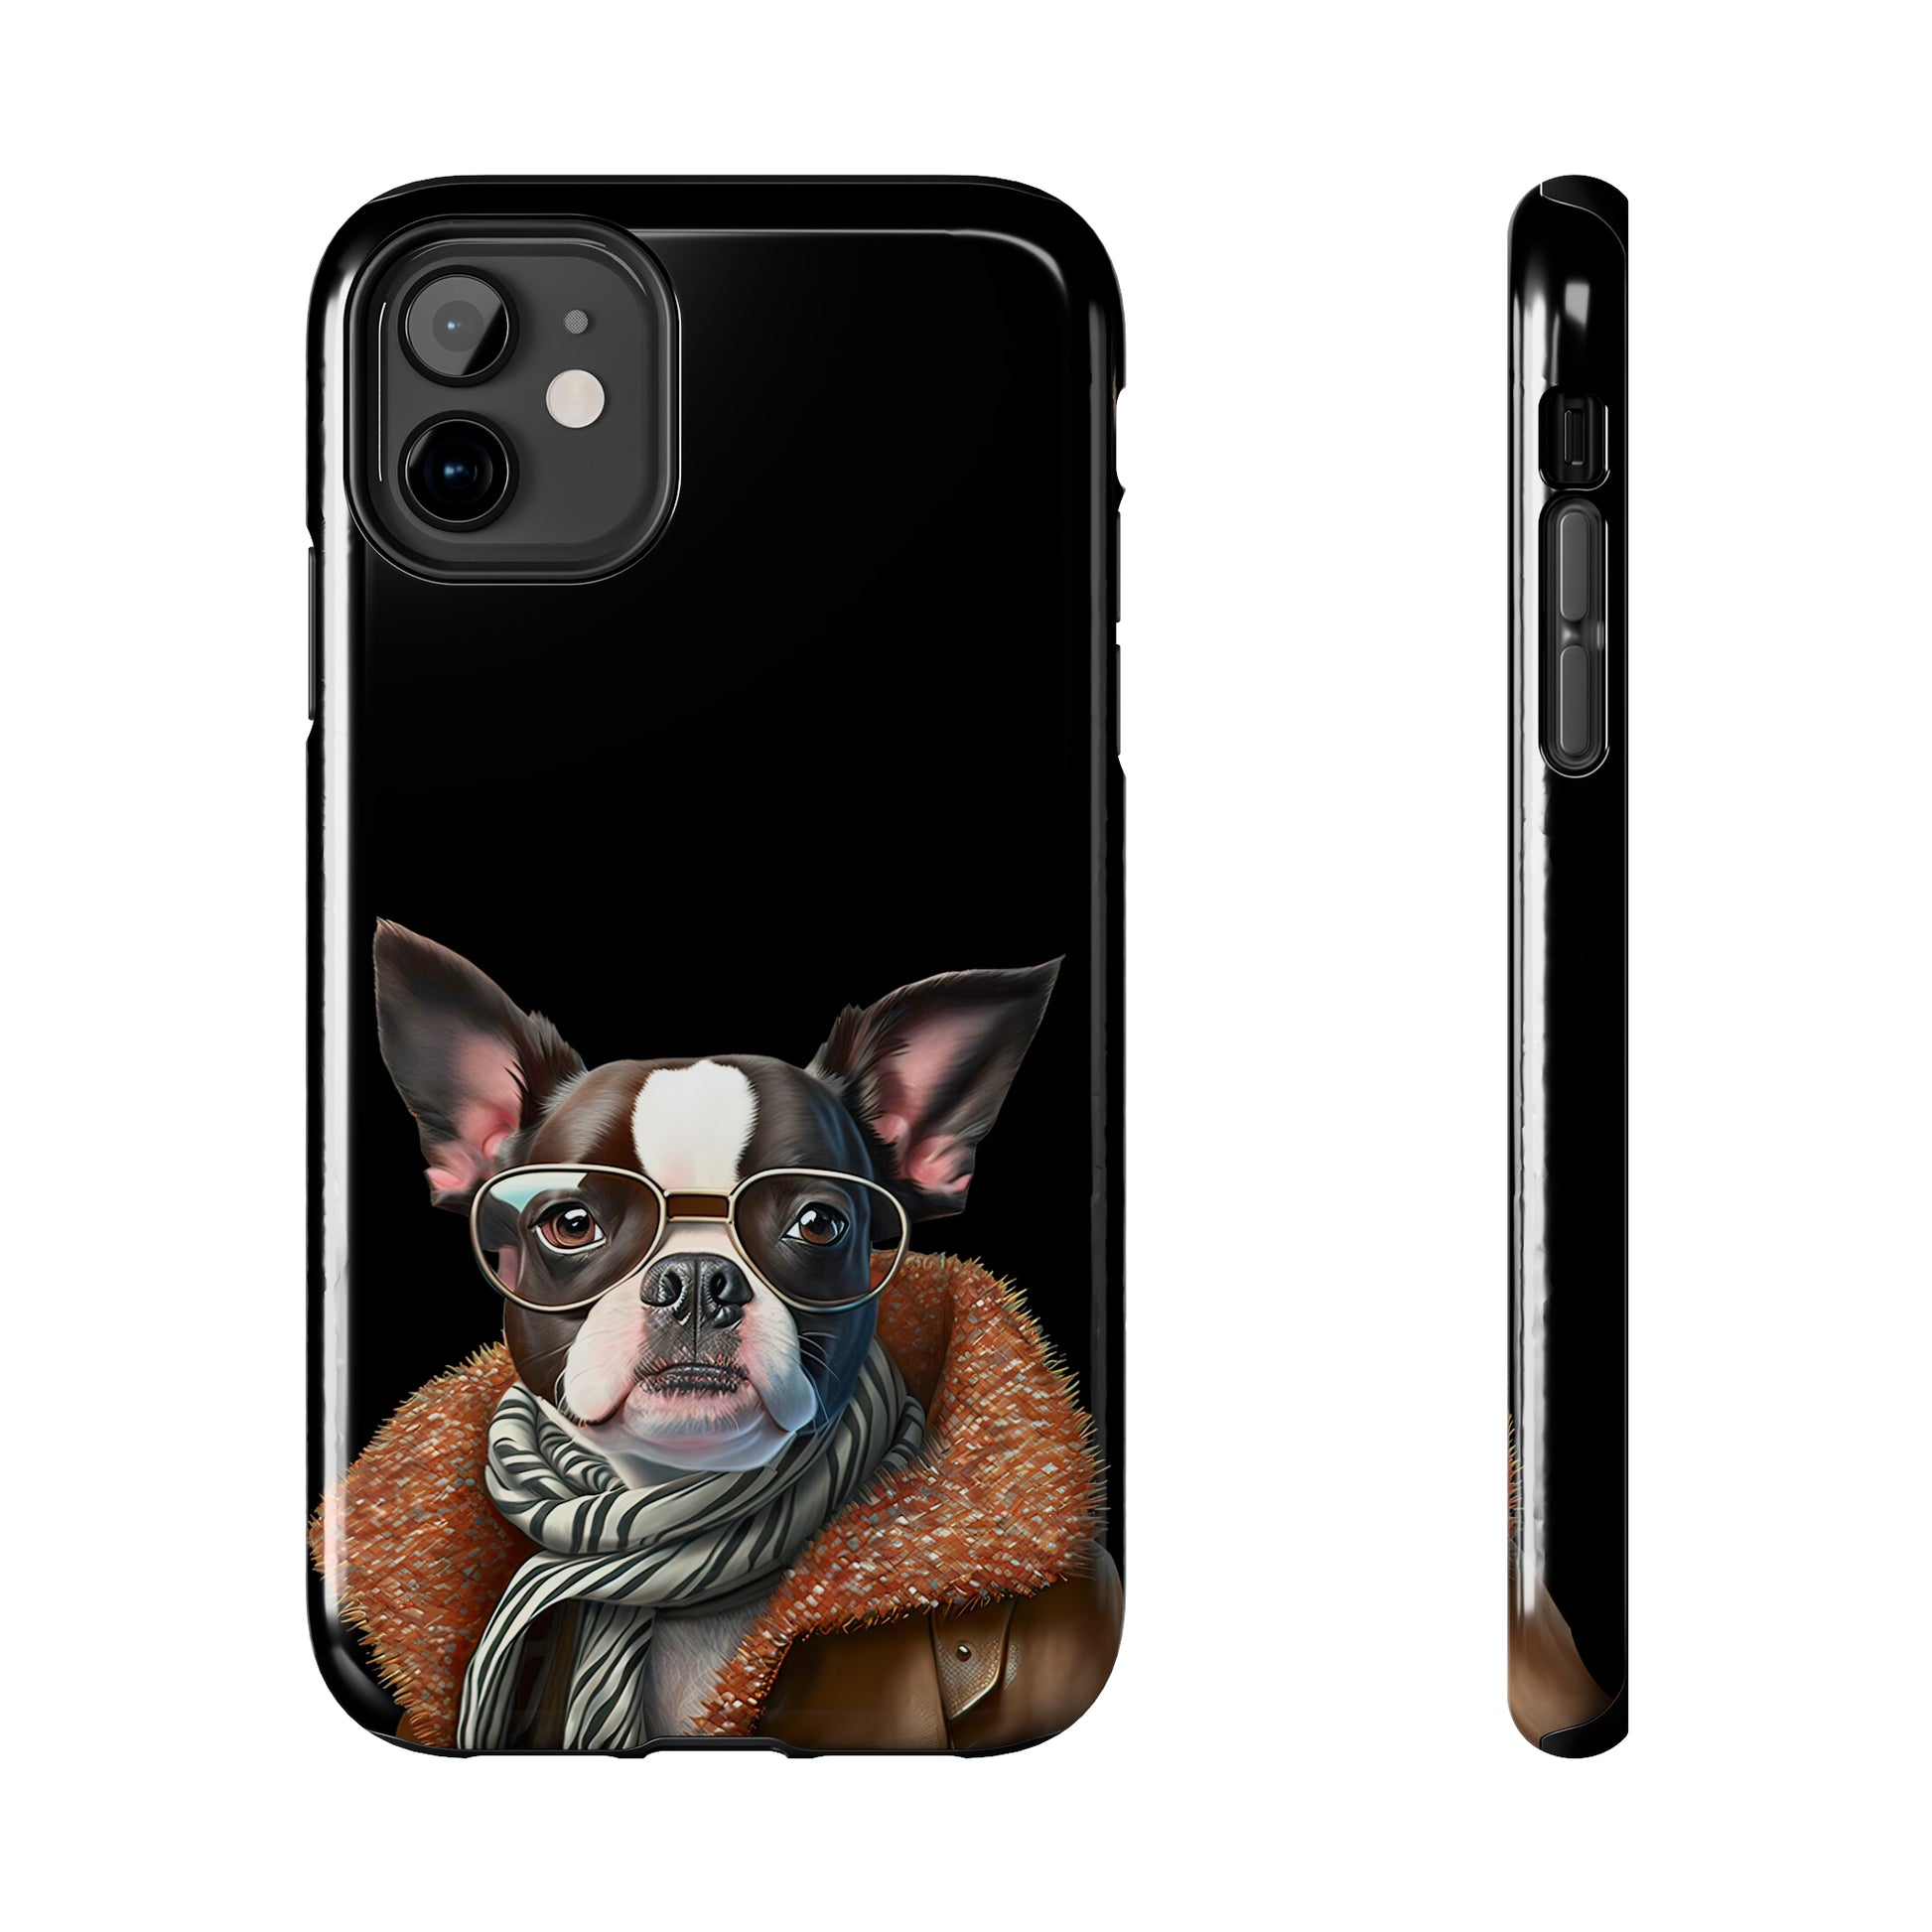  Benny Tough Phone Cases in USA - Shaggy Chic